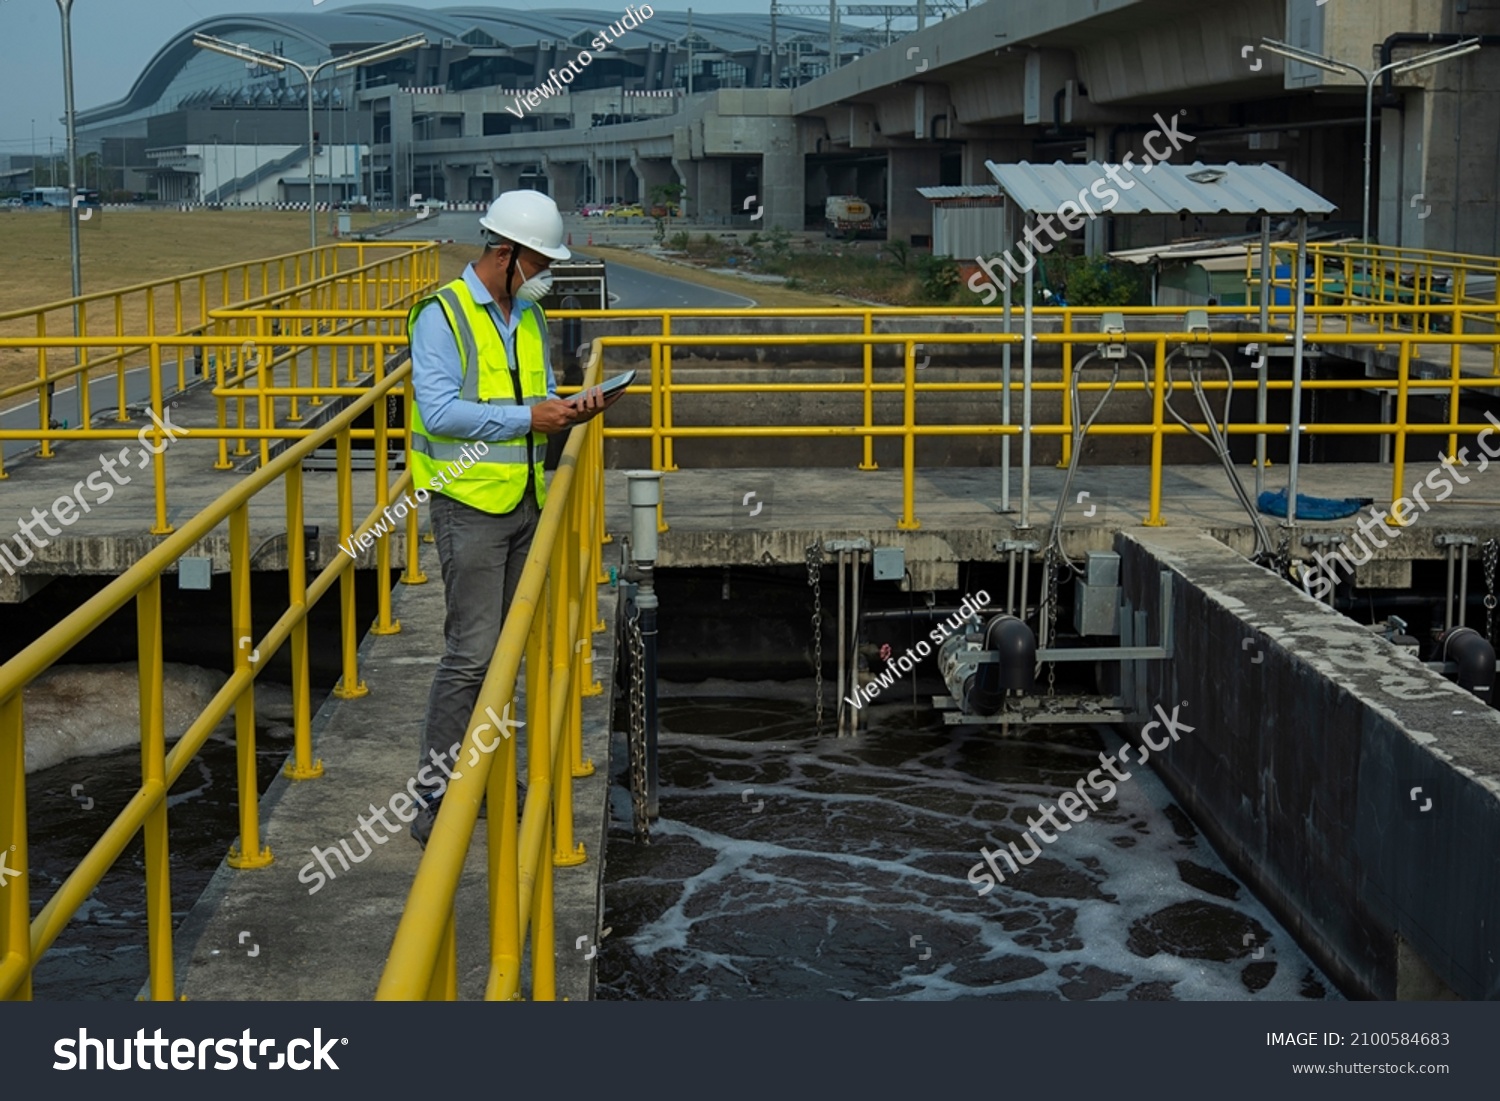 Wastewater treatment concept. Service engineer on  waste water Treatment plant. #2100584683